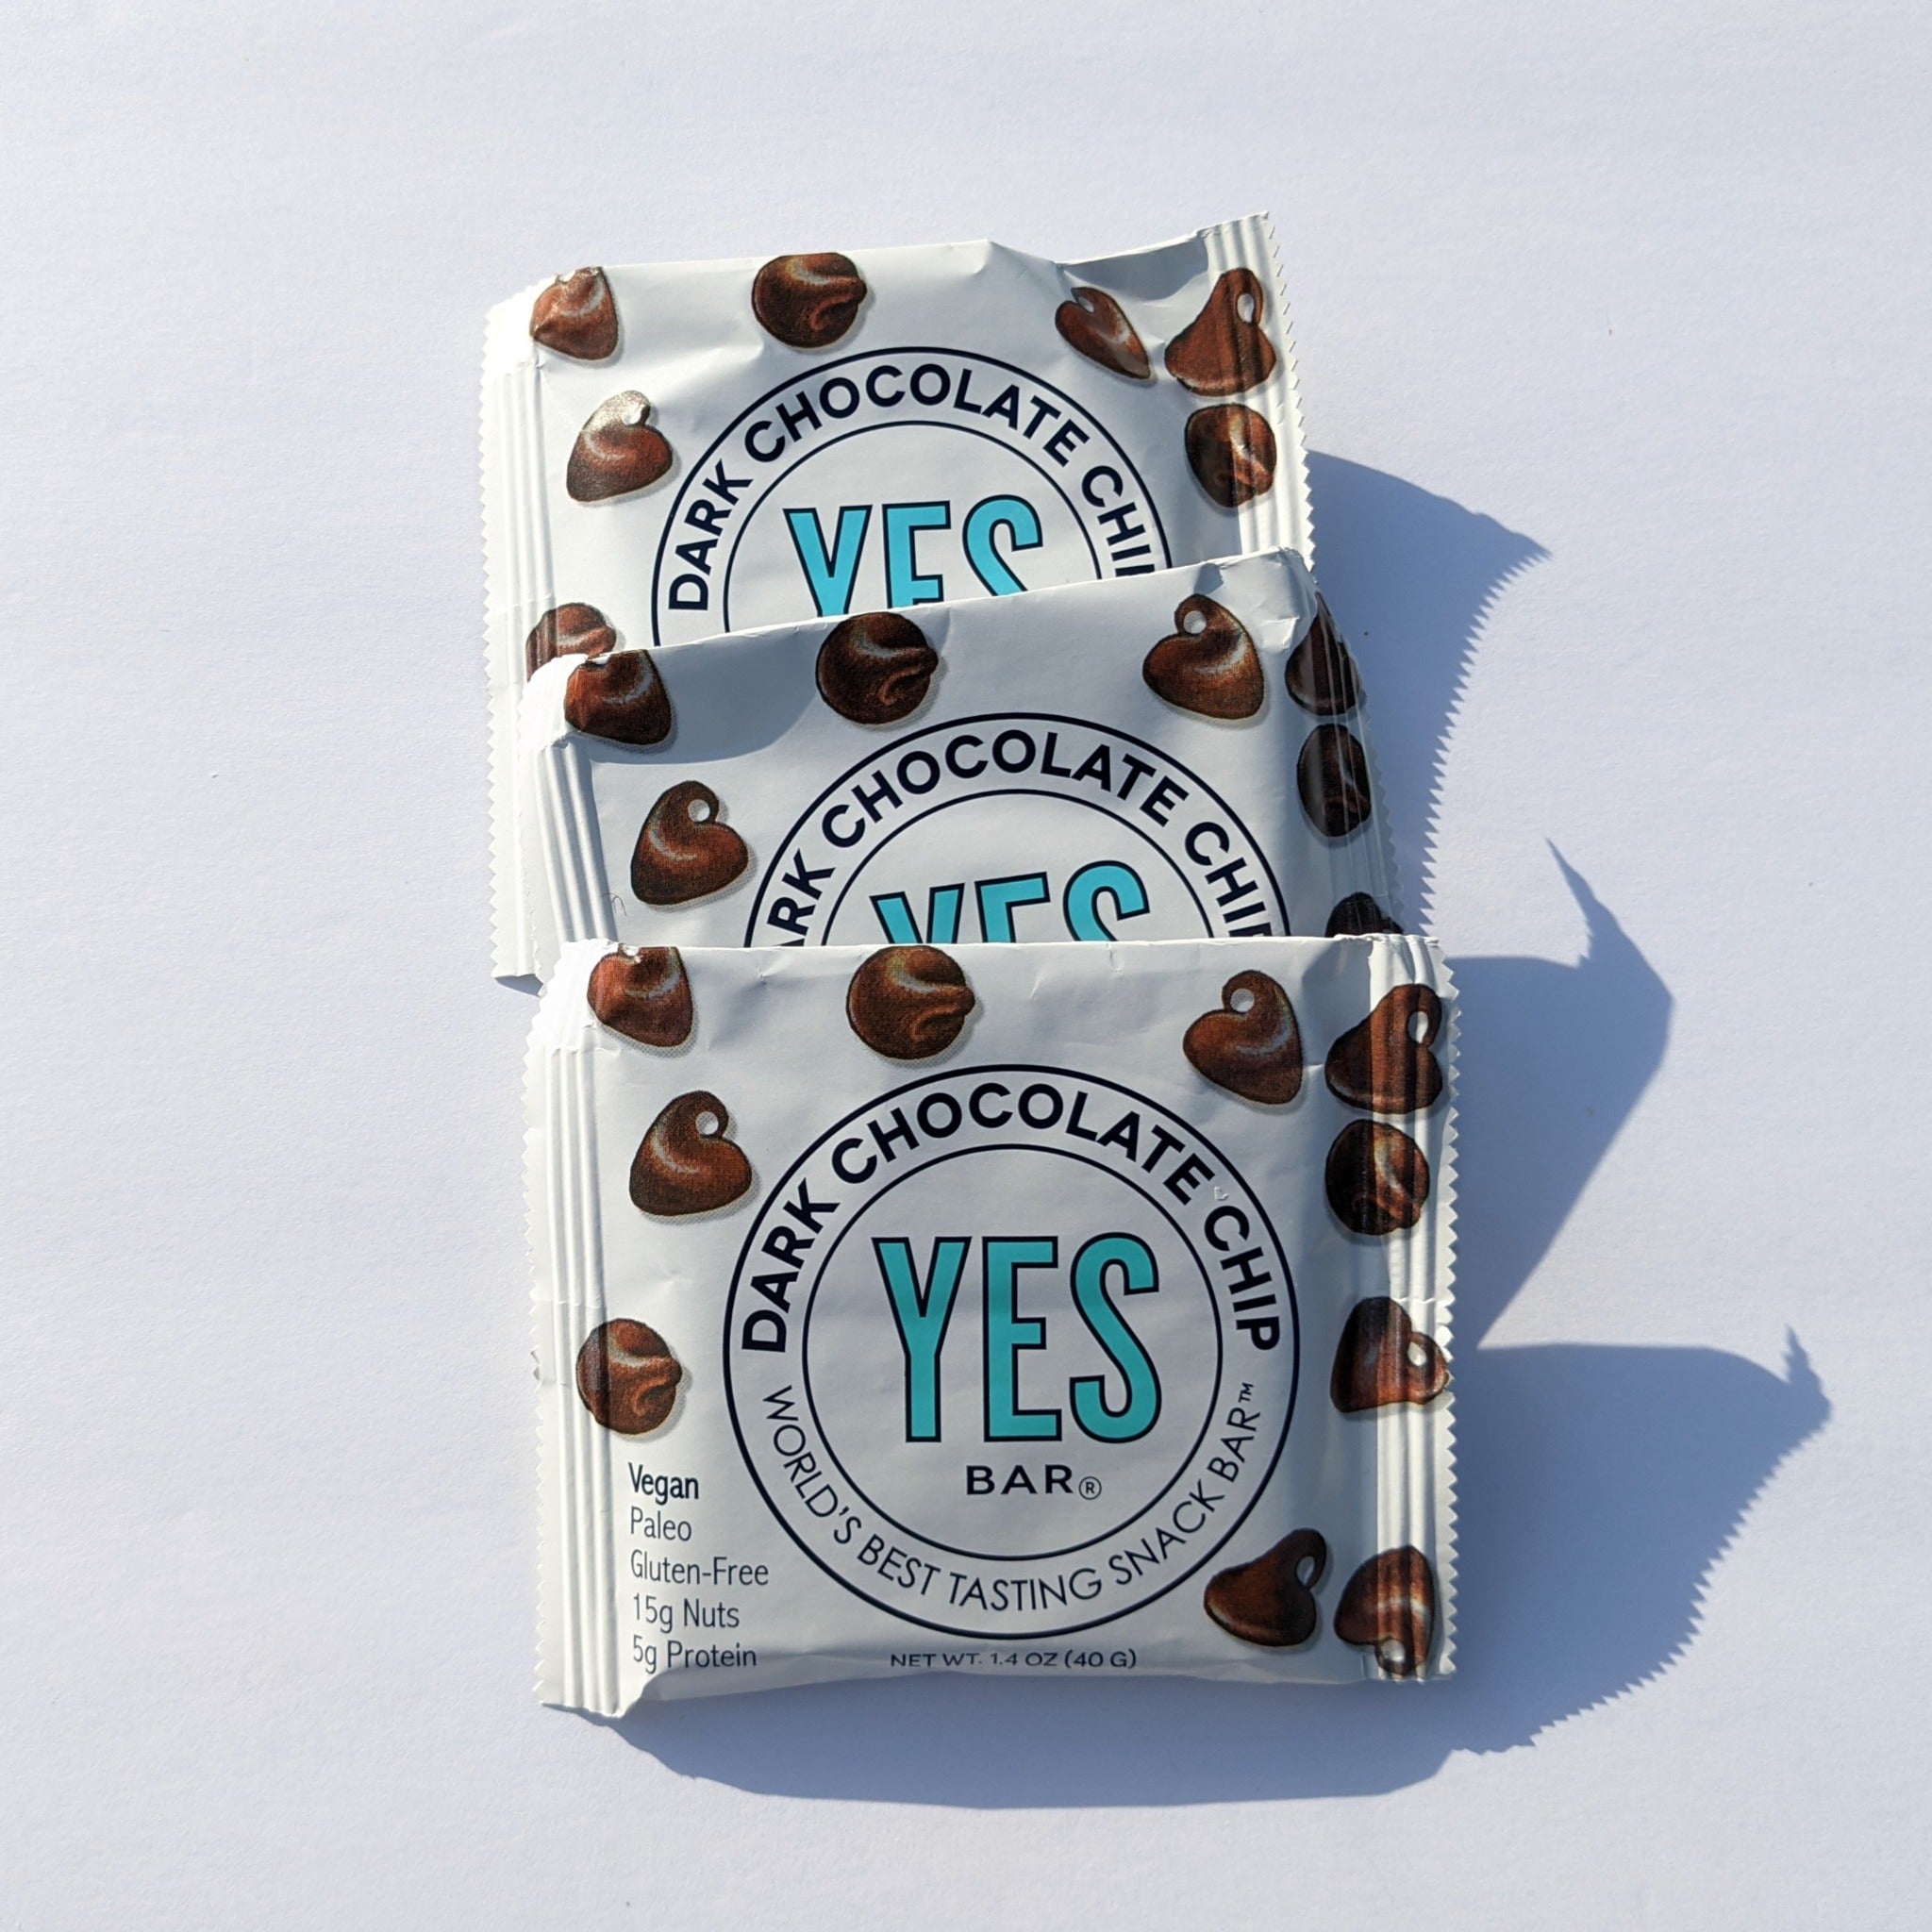 Even the wrapper looks great on our Dark Chocolate Chip Bars! 